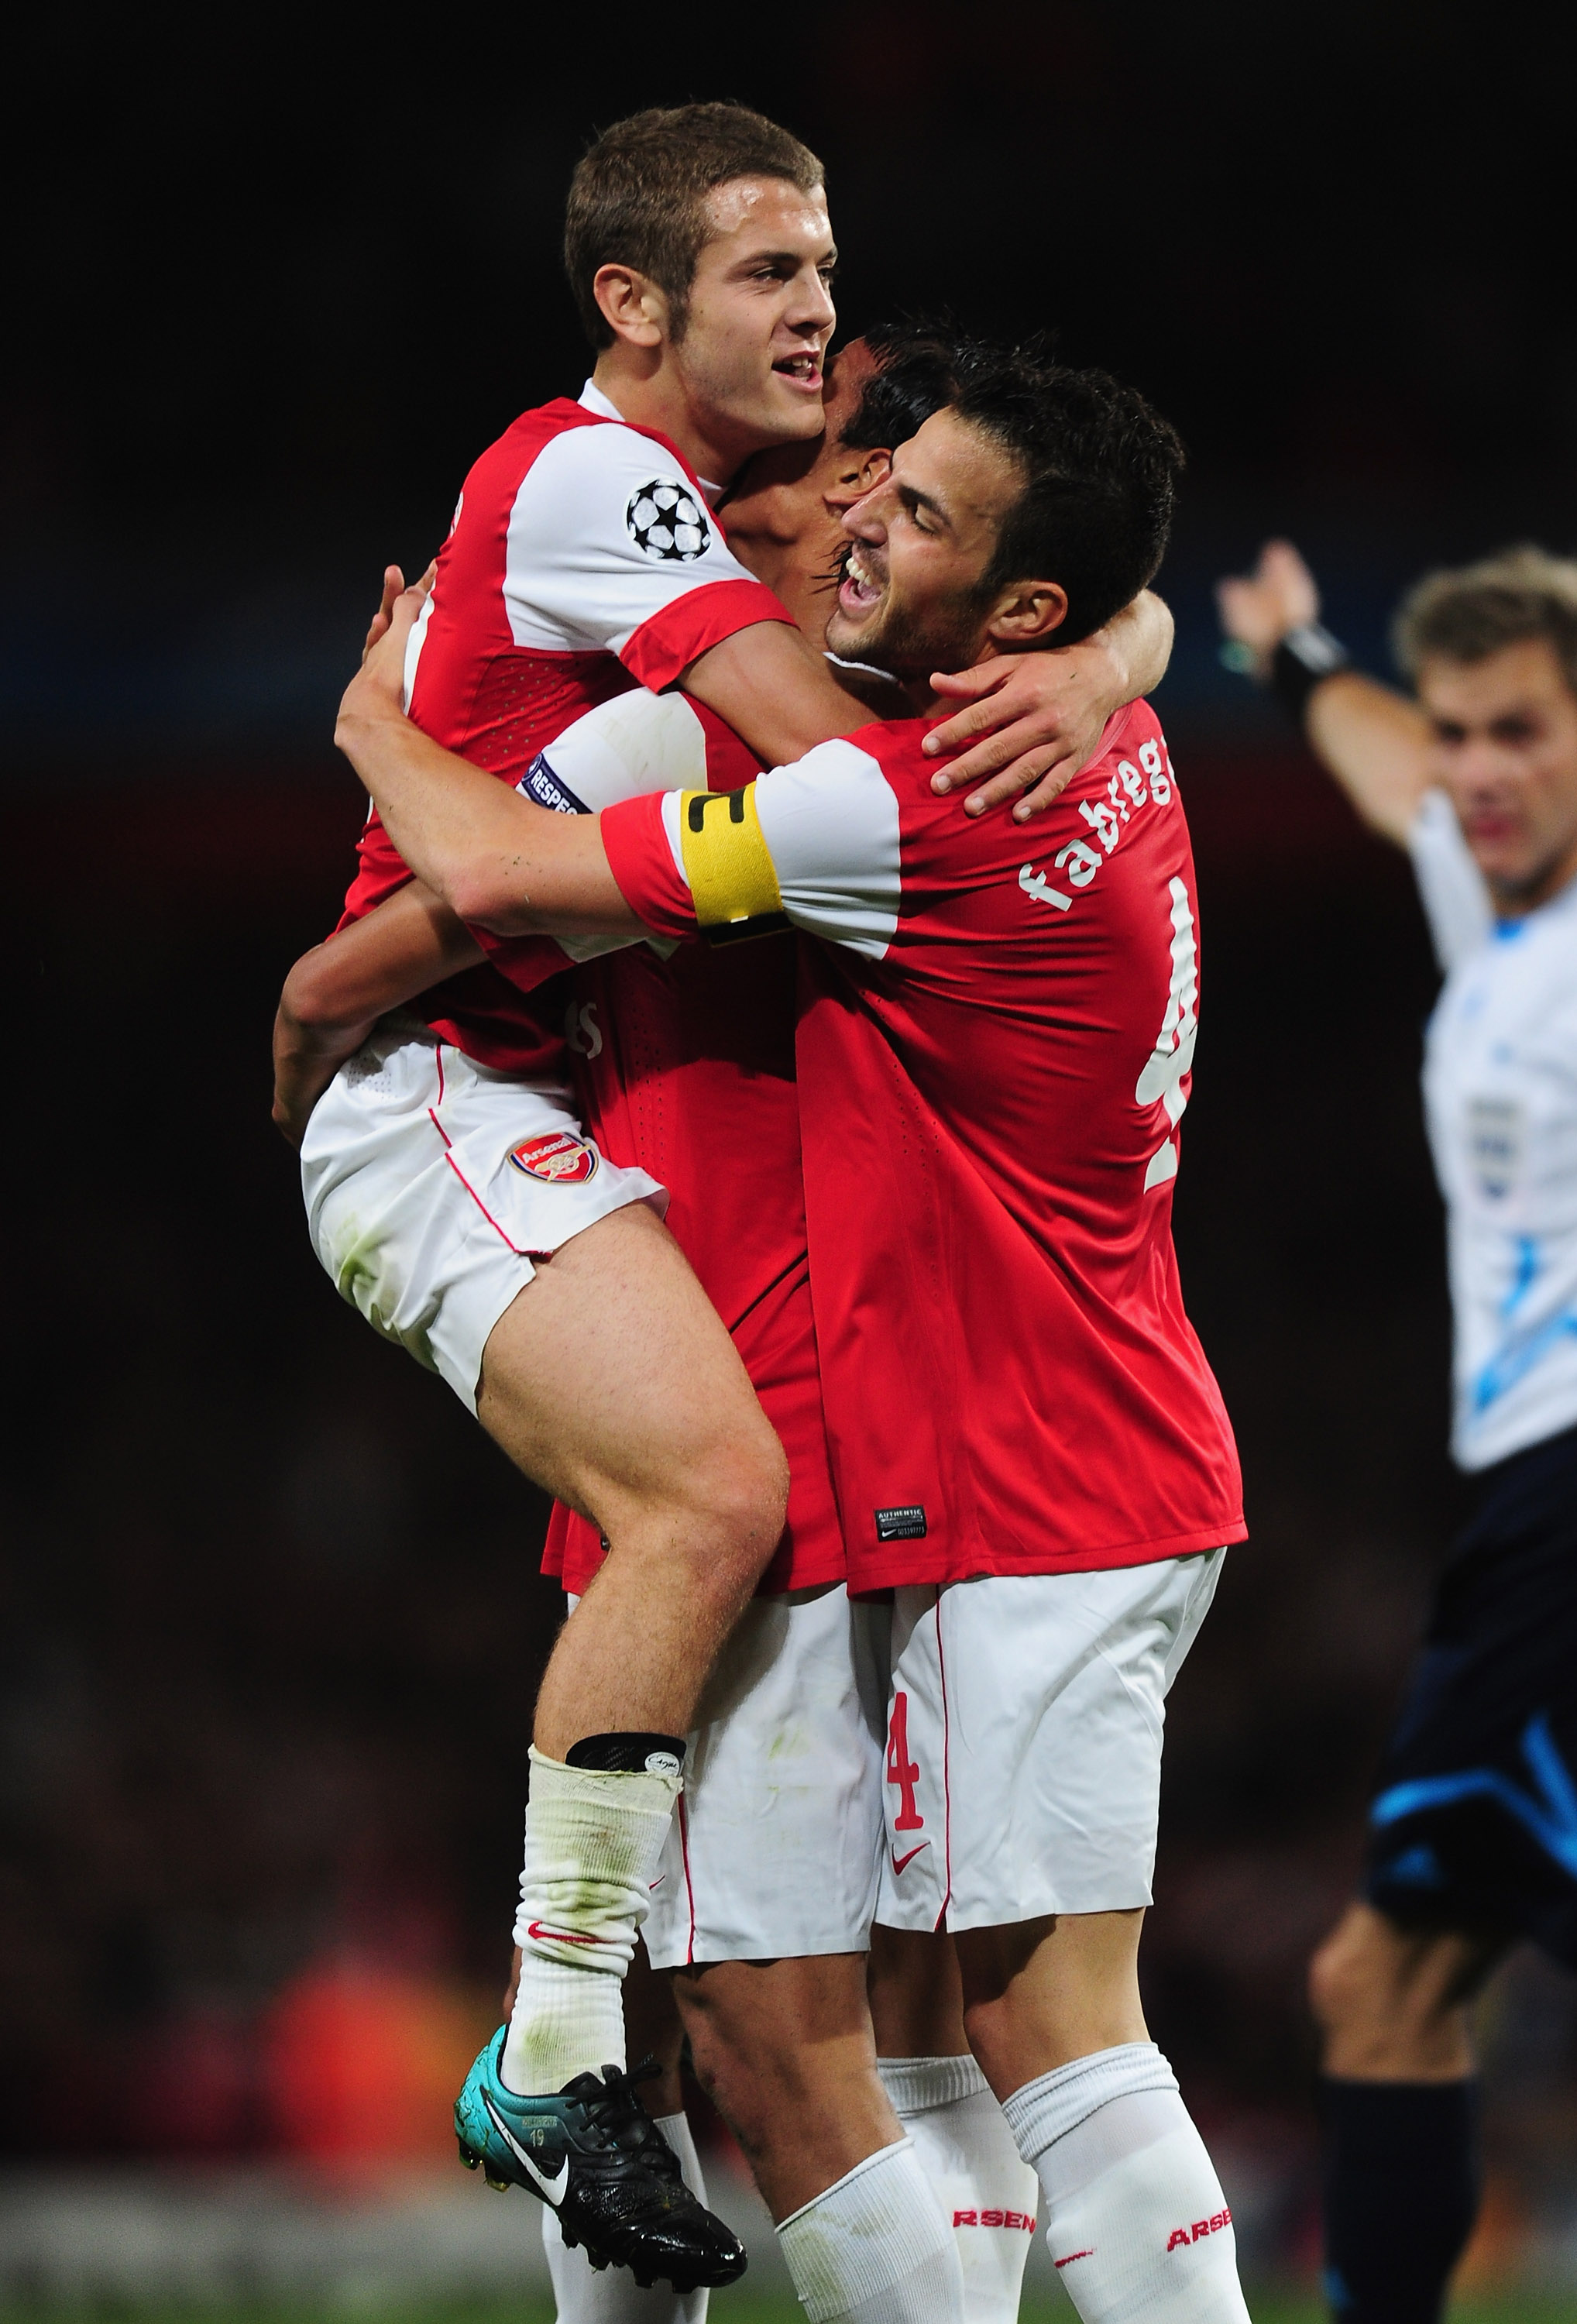 LONDON, ENGLAND - SEPTEMBER 15:  Marouane Chamakh of Arsenal celebrates with team mate Jack Wilshere after scoring during the UEFA Champions League Group H match between Arsenal and SC Braga at the Emirates Stadium on September 15, 2010 in London, England